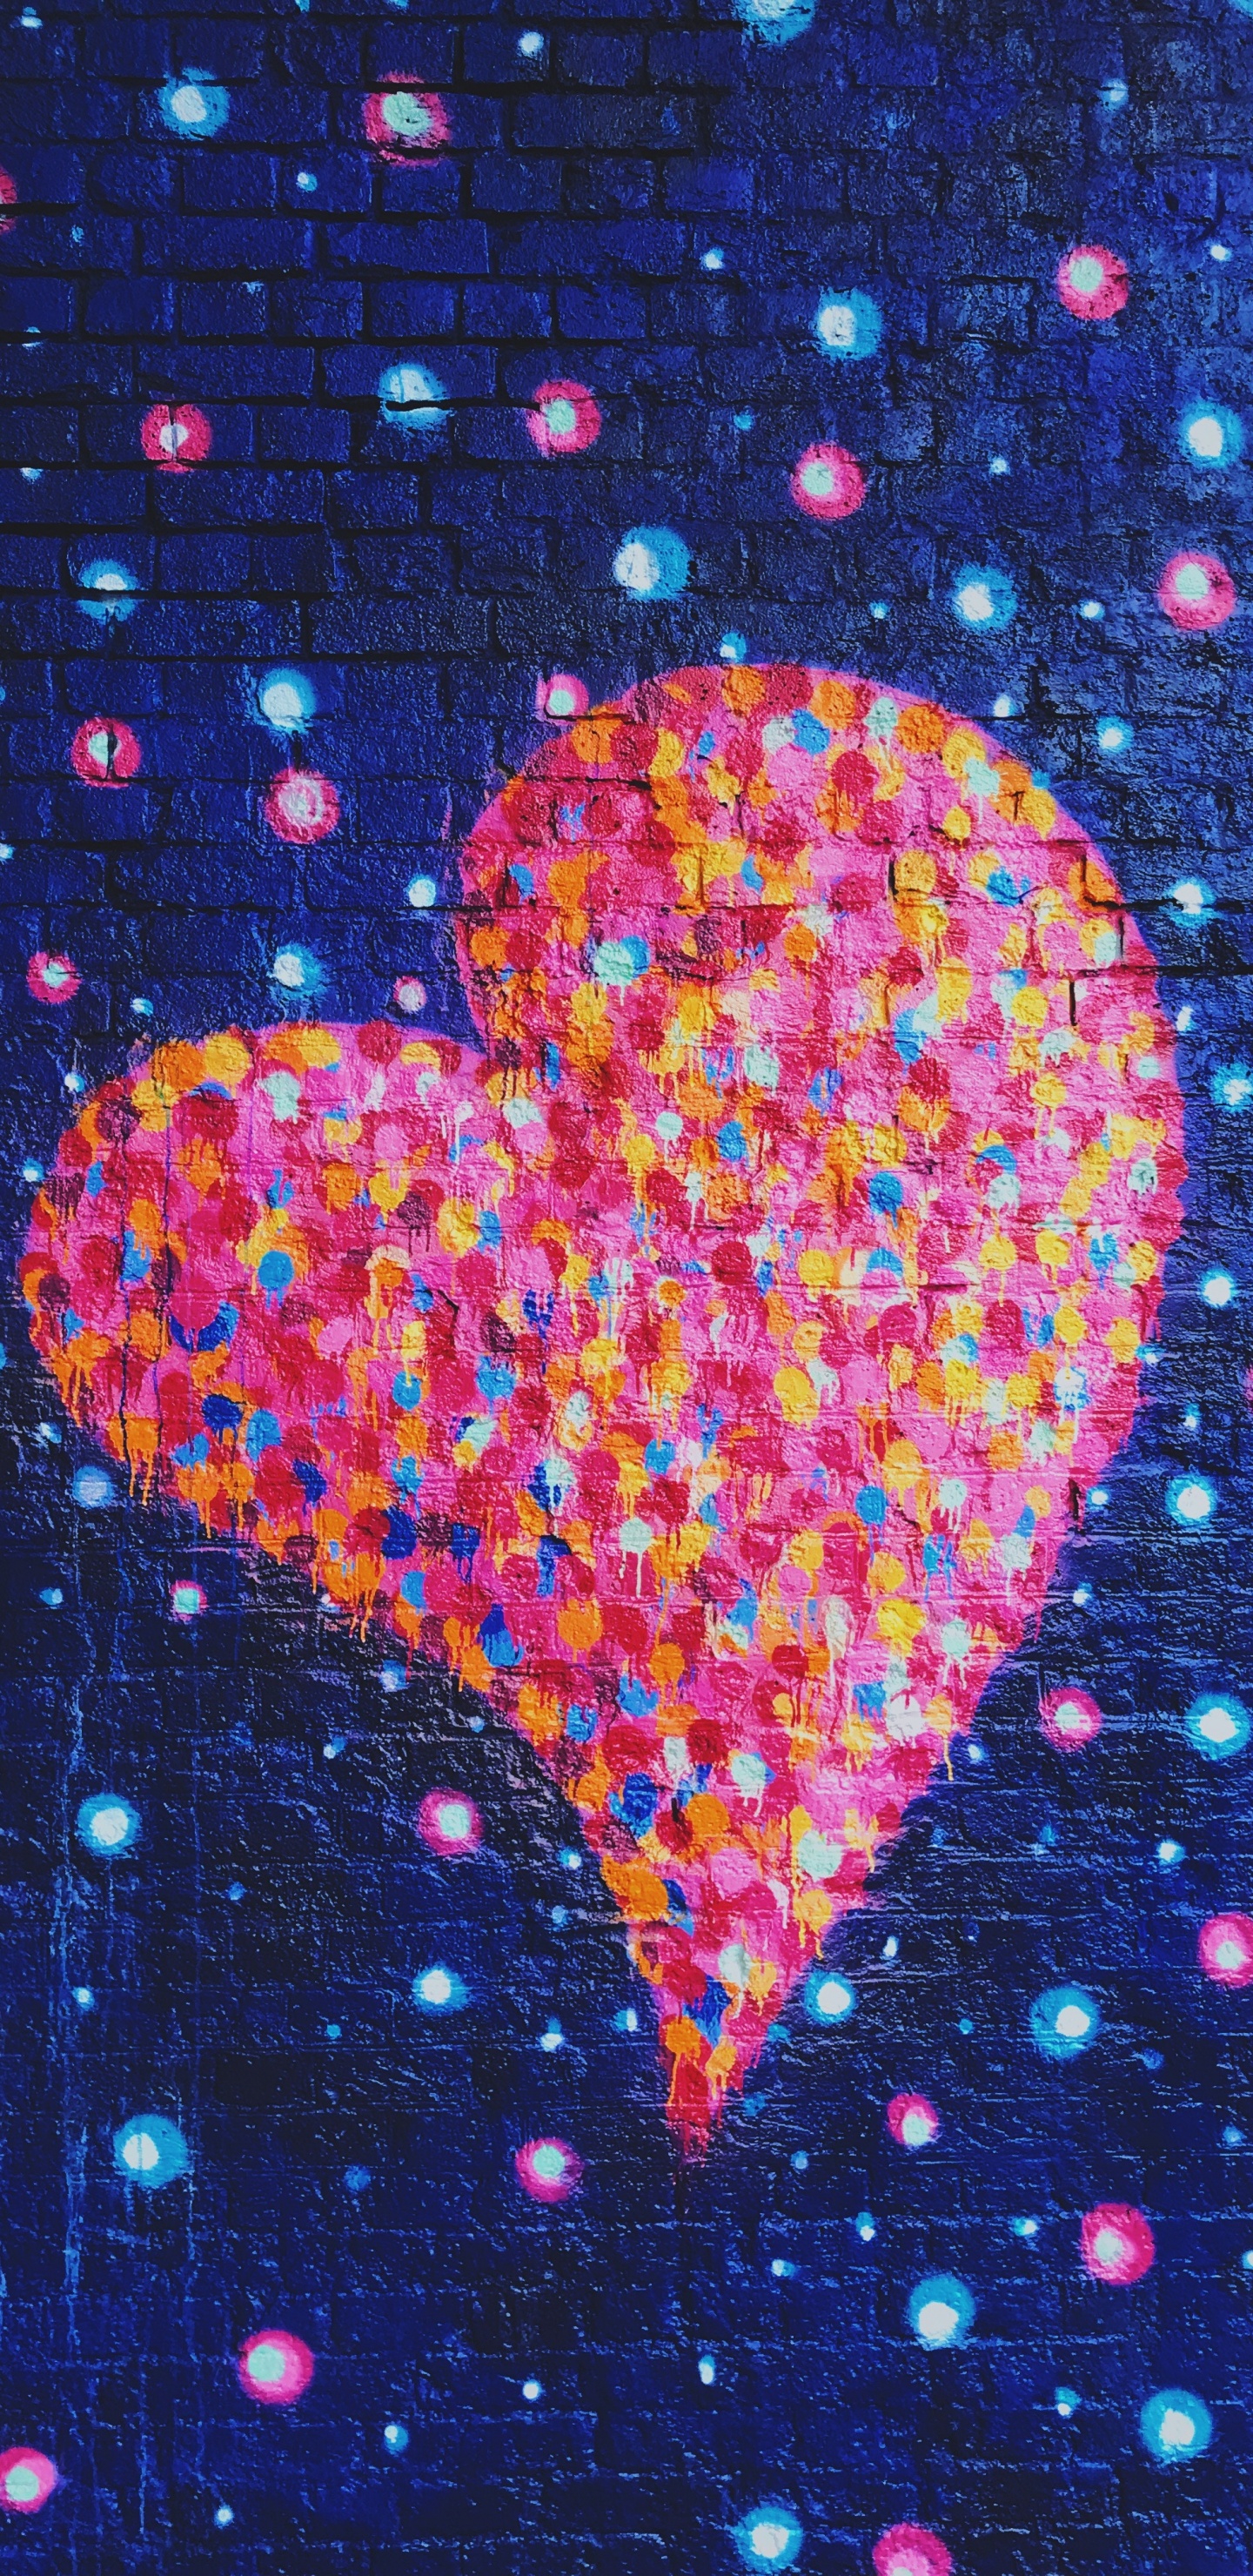 Red Heart With Blue and Pink Hearts Illustration. Wallpaper in 1440x2960 Resolution